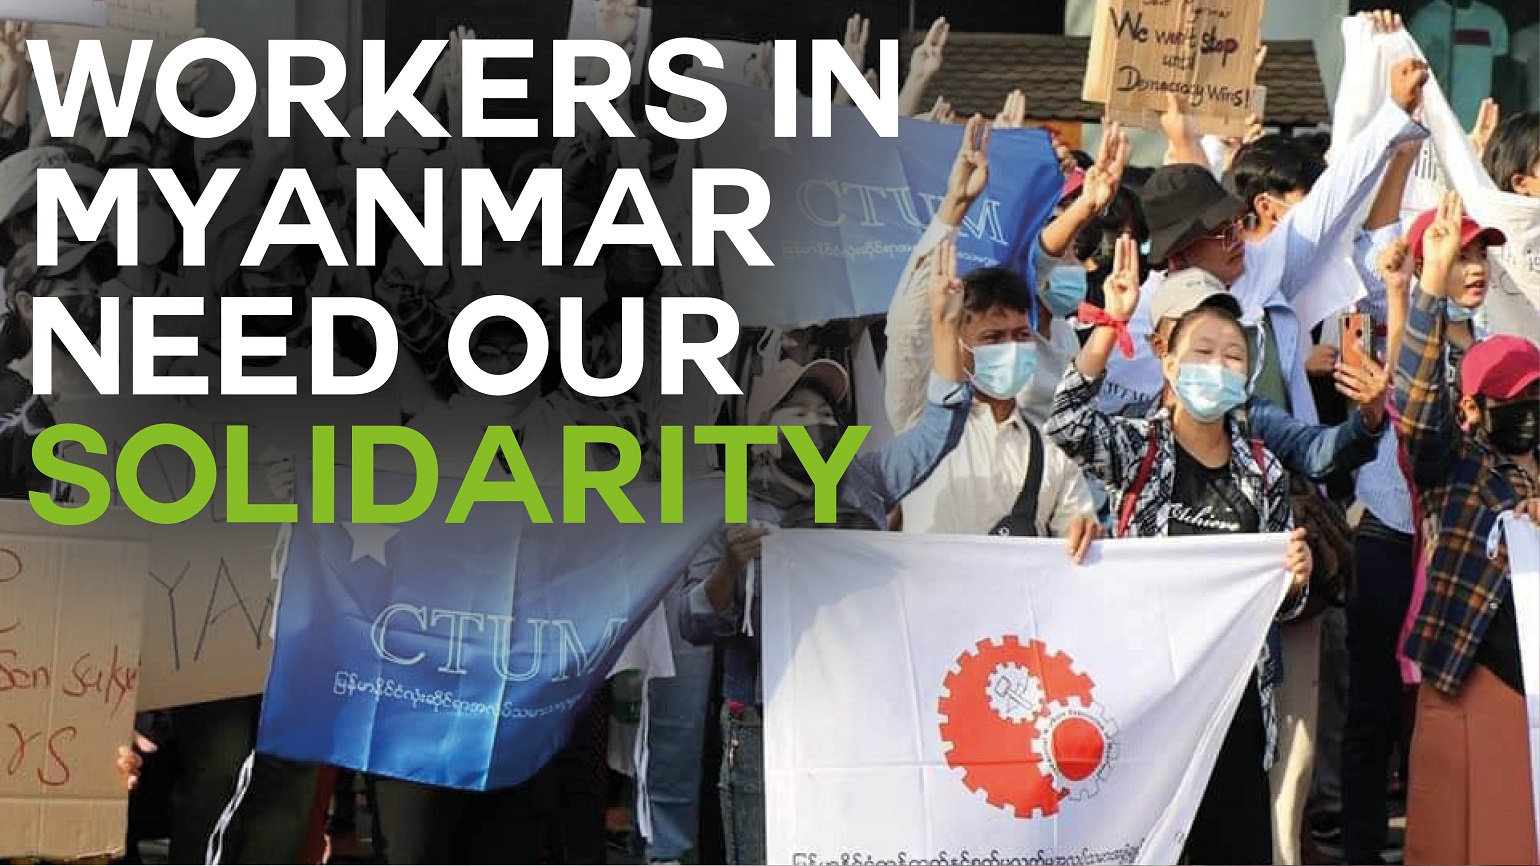 A photo of workers protesting in Myanmar with text overlaid reading "Workers in Myanmar need our solidarity"